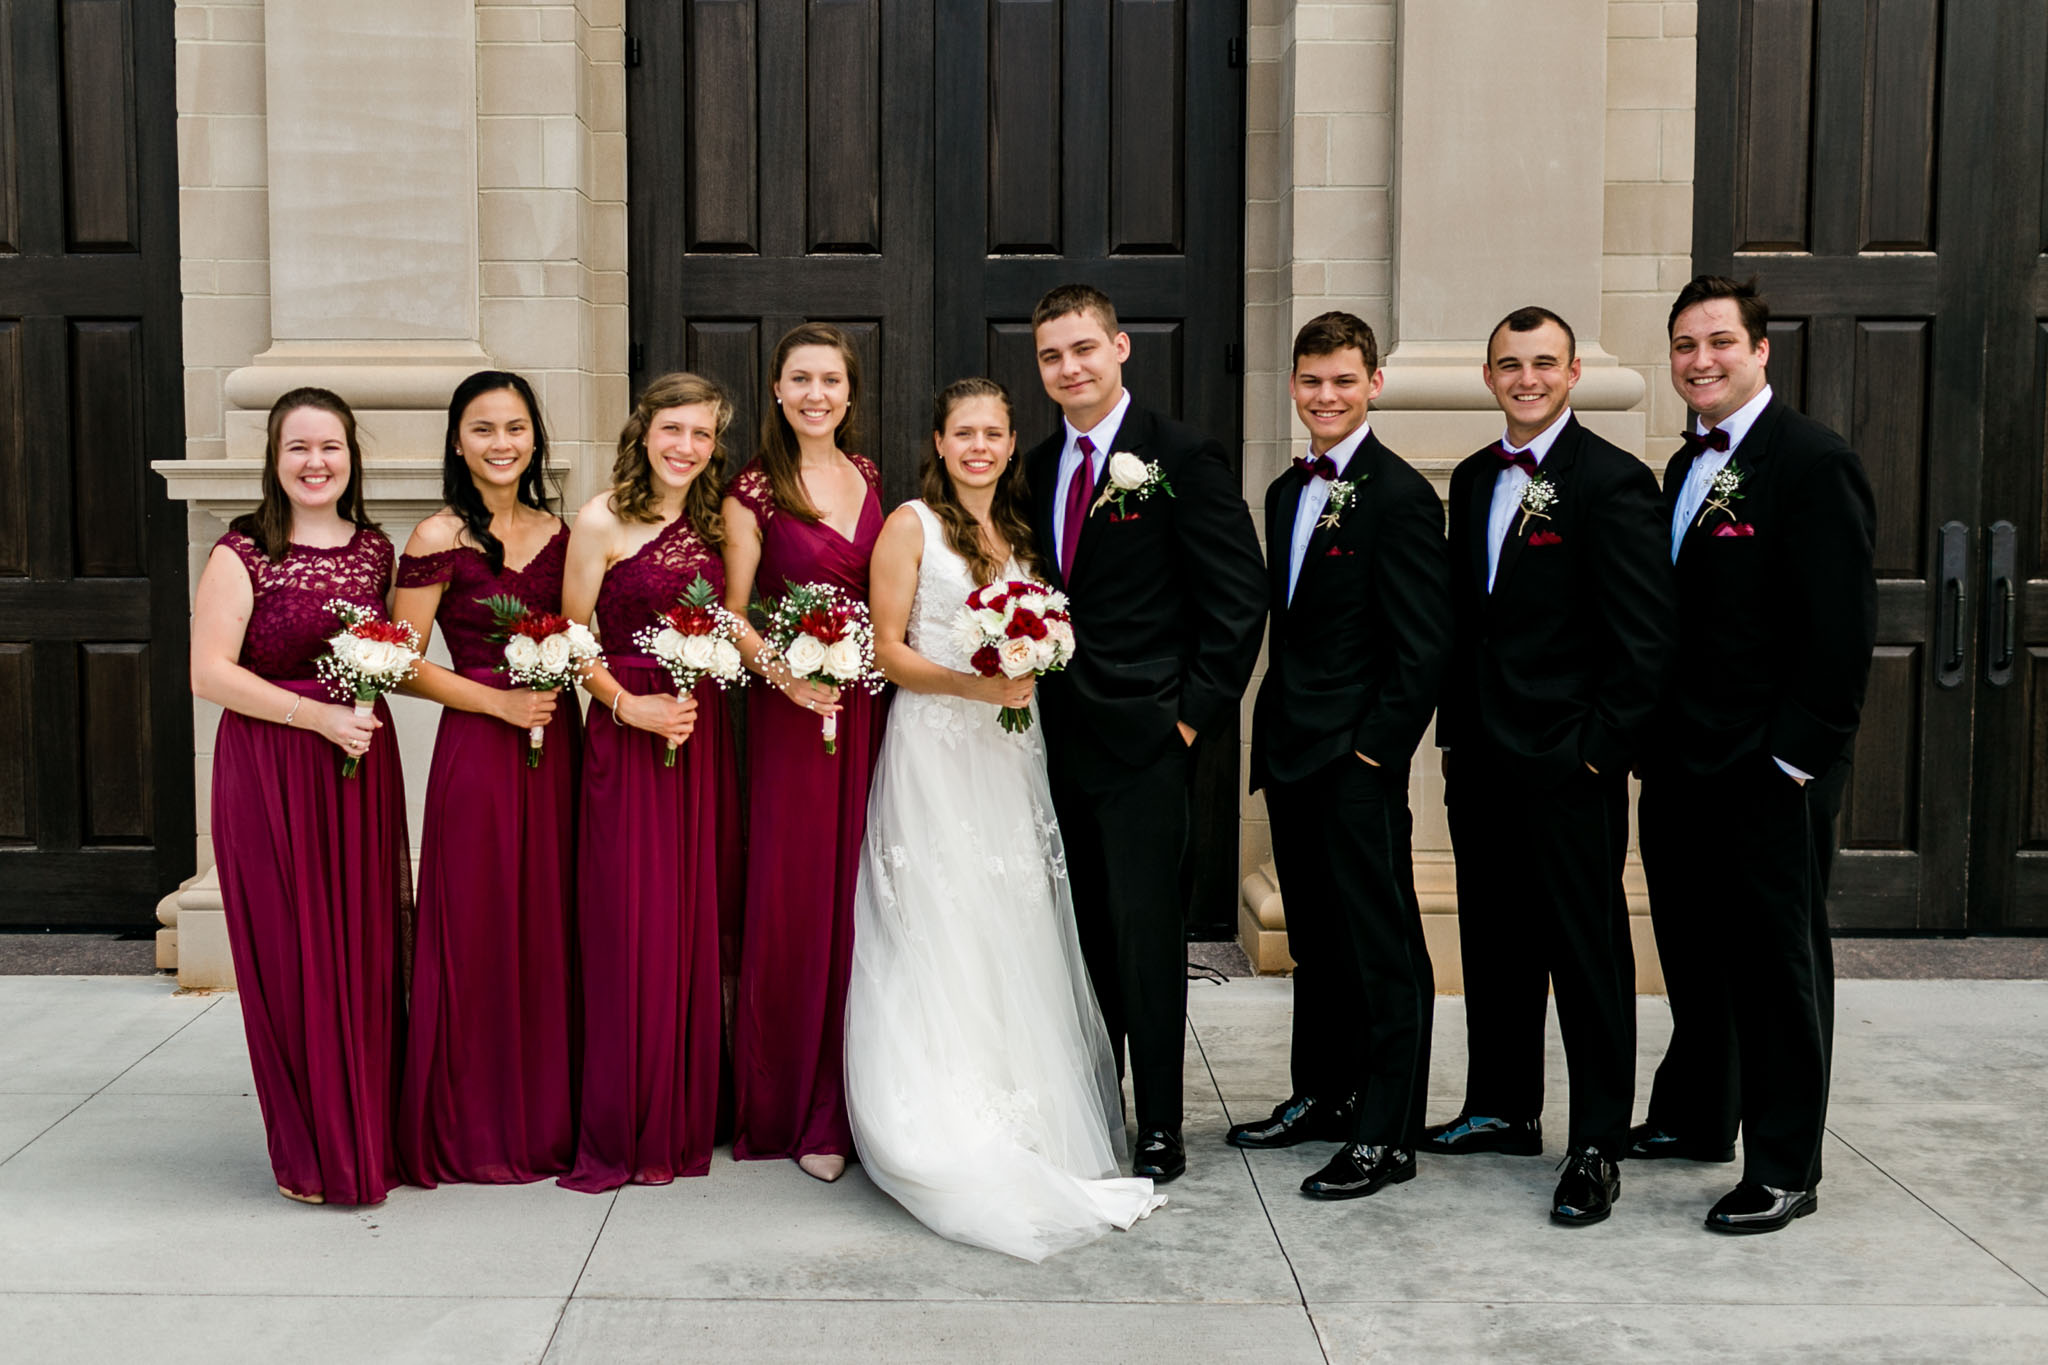 Wedding party photo wine red color scheme | Raleigh Wedding Photographer | By G. Lin Photography